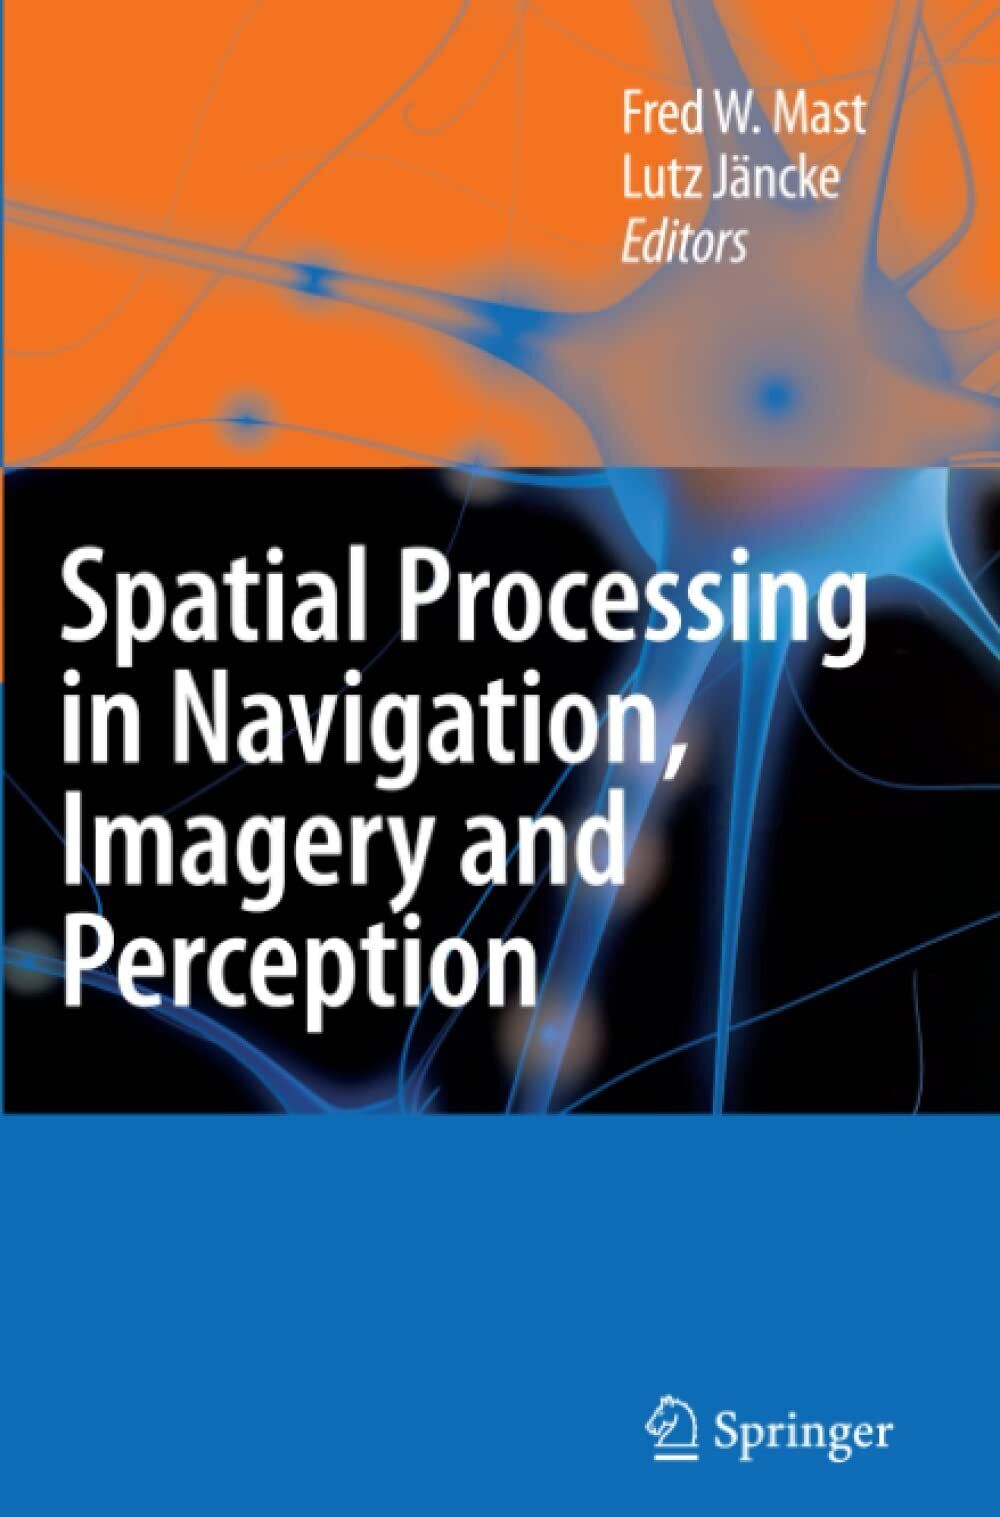 Spatial Processing in Navigation, Imagery and Perception - Fred W. Mast - 2010